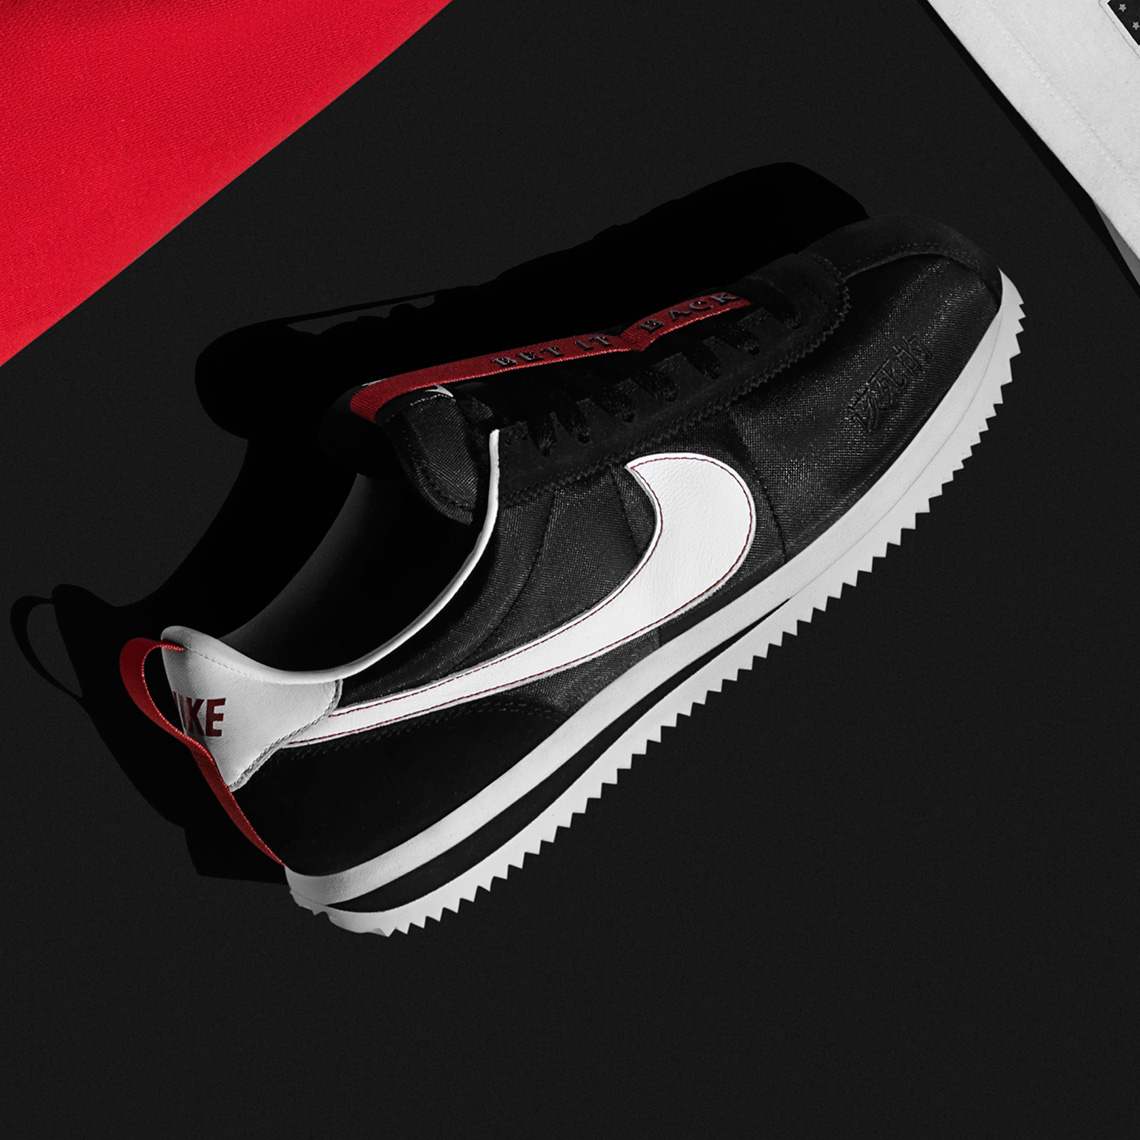 nike-top-dawg-entertainment-cortez-kenny-1-the-championship-tour-release-info-9.jpg